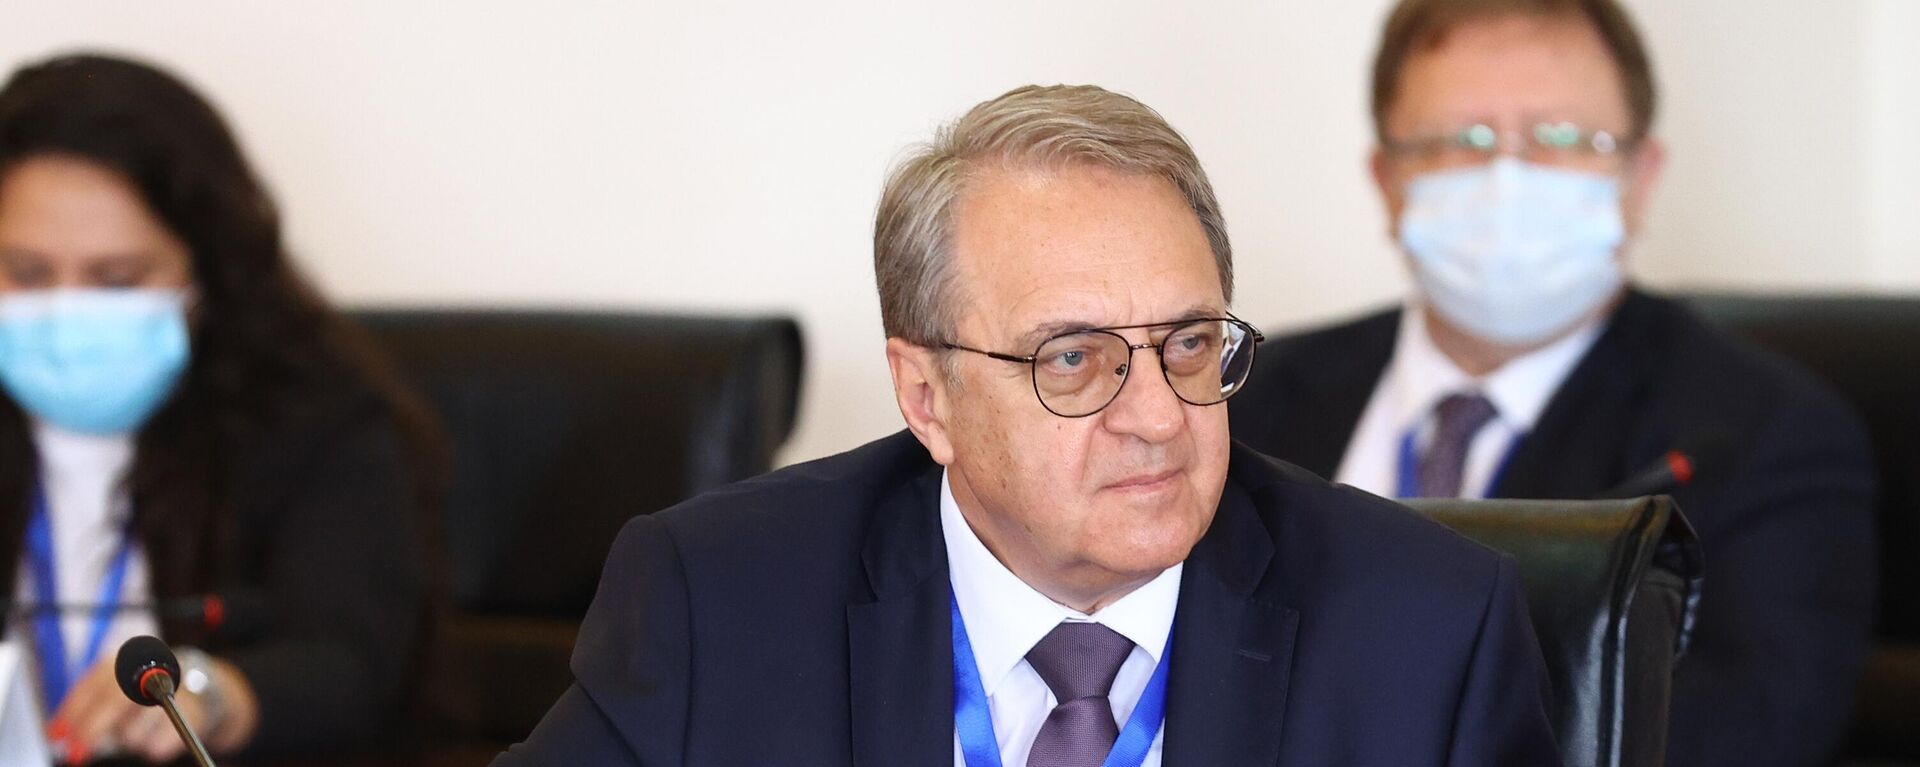 Russian Deputy Foreign Minister Mikhail Bogdanov at a meeting in Uganda between Russian Foreign Minister Sergey Lavrov and President of the Republic of Uganda Yoweri Museveni.  - Sputnik International, 1920, 26.02.2023